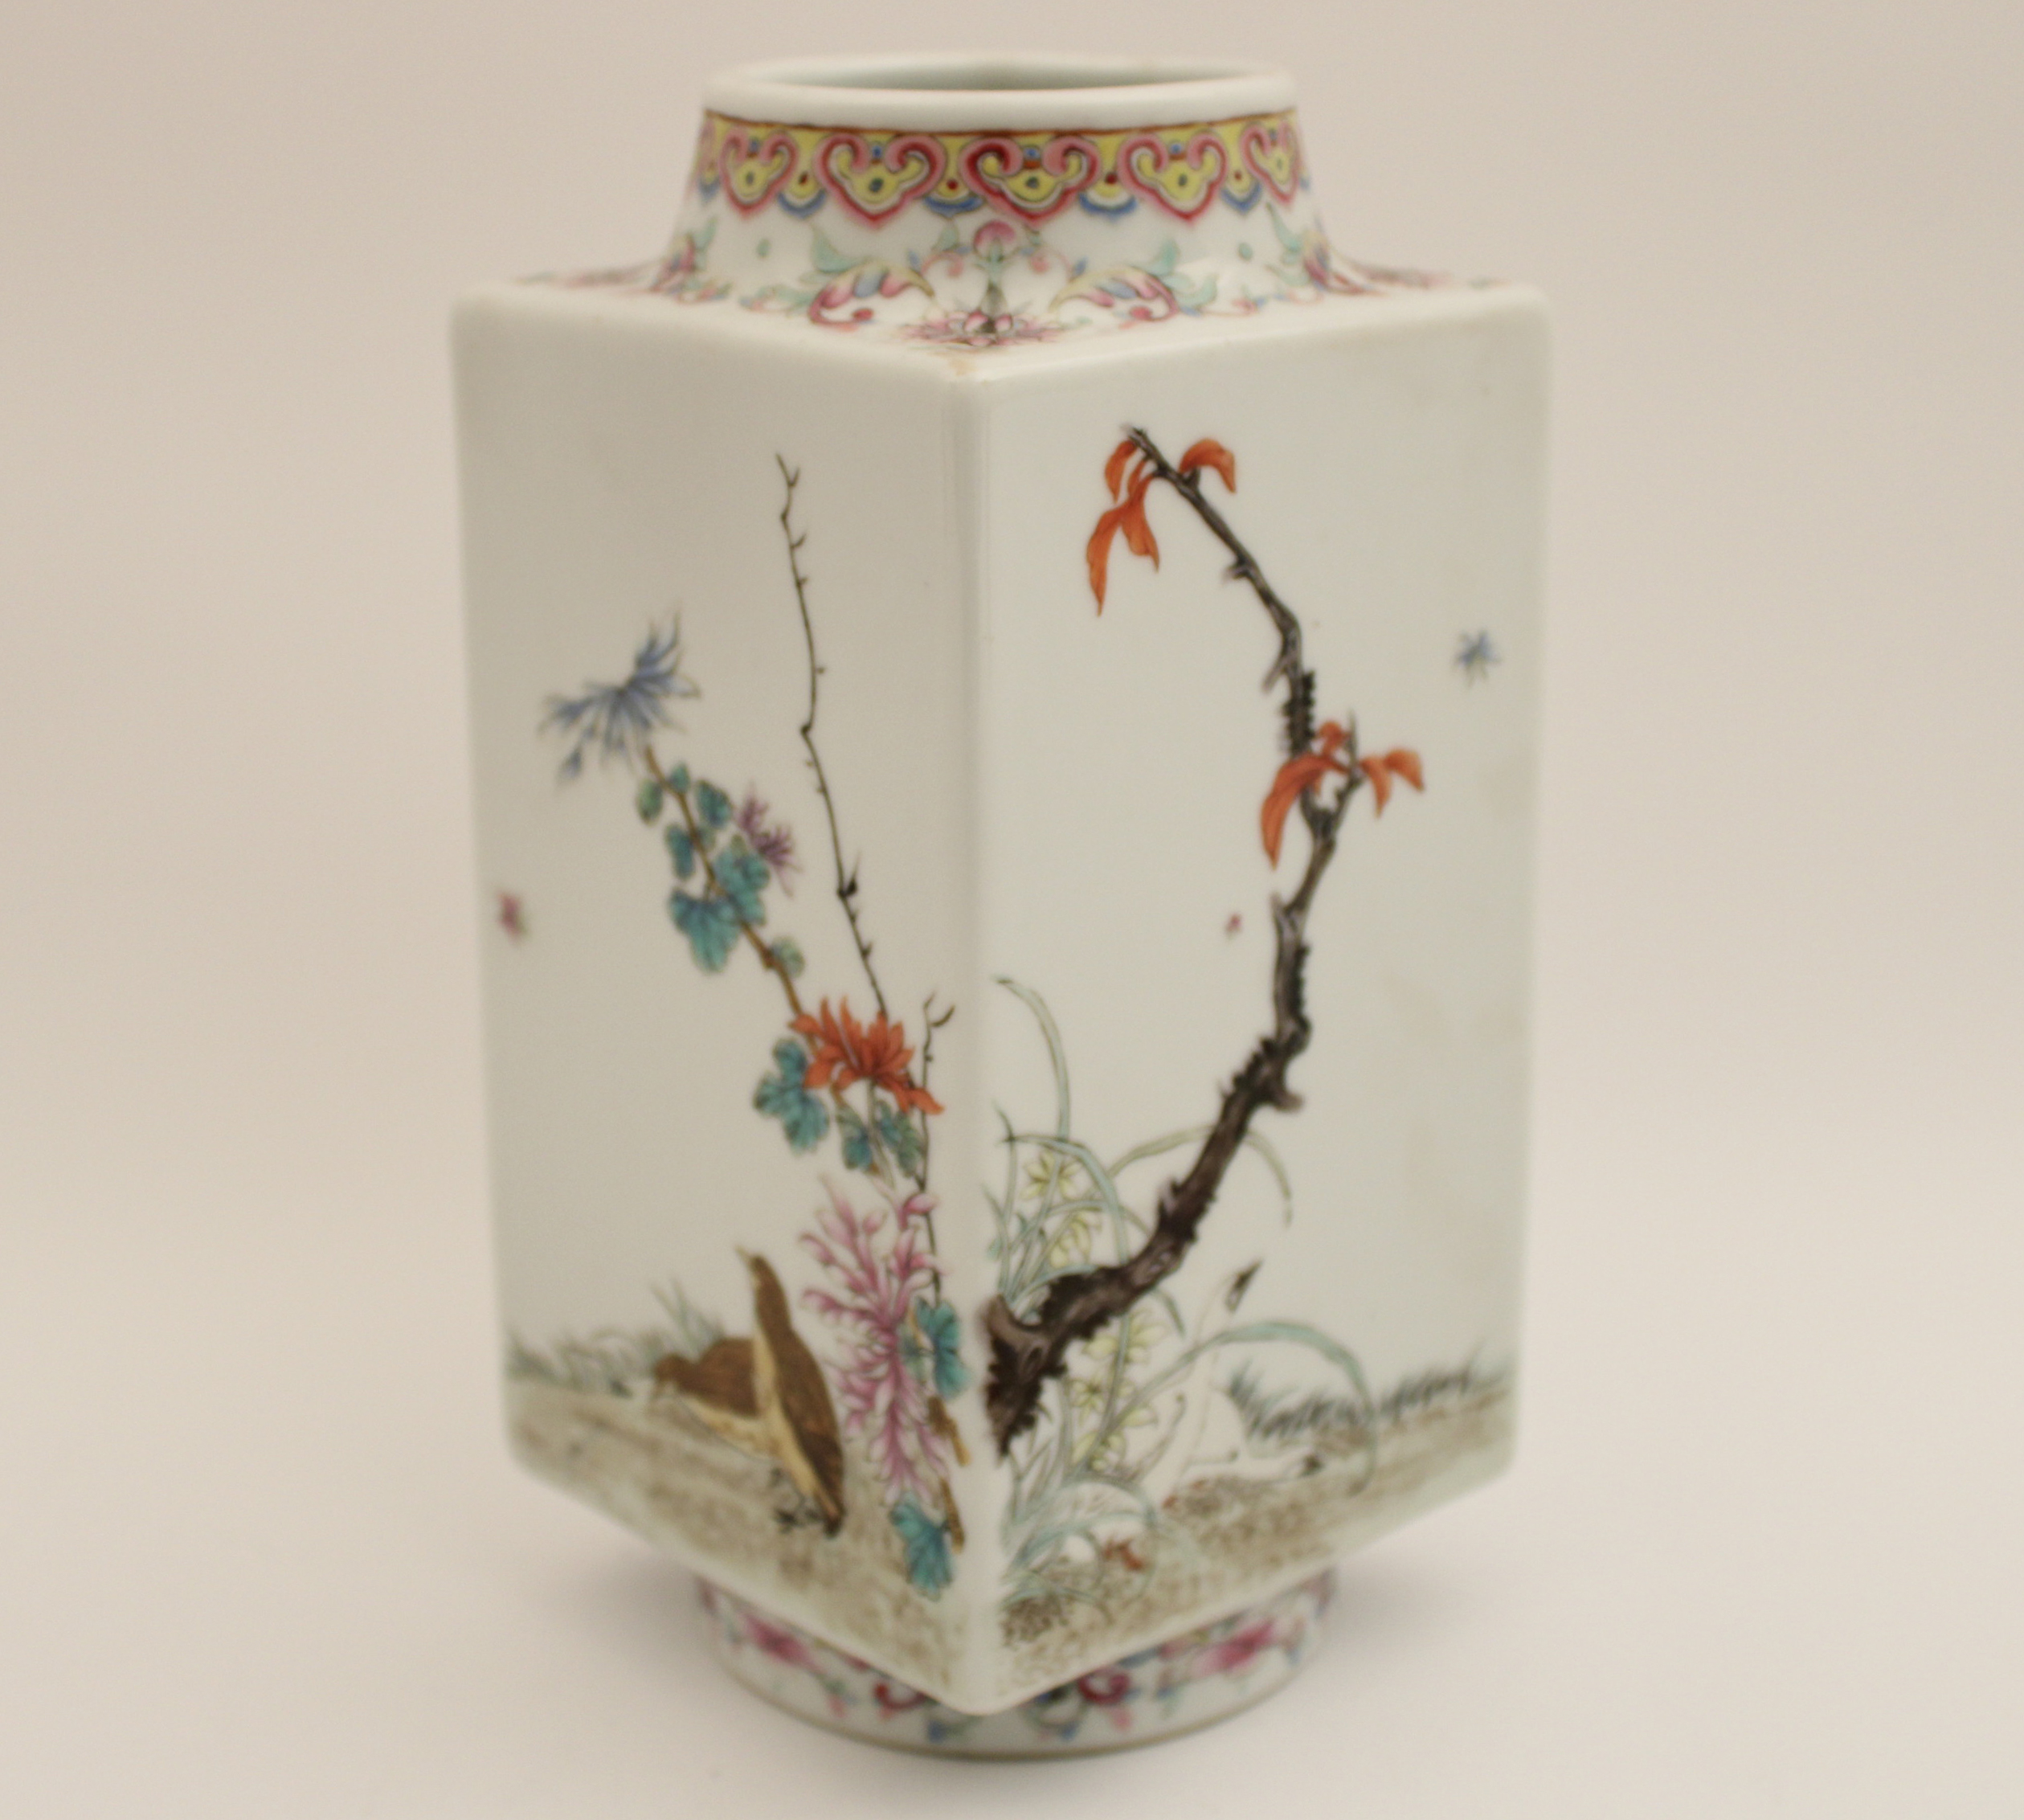 FINE EXECUTED CHINESE PORCELAIN